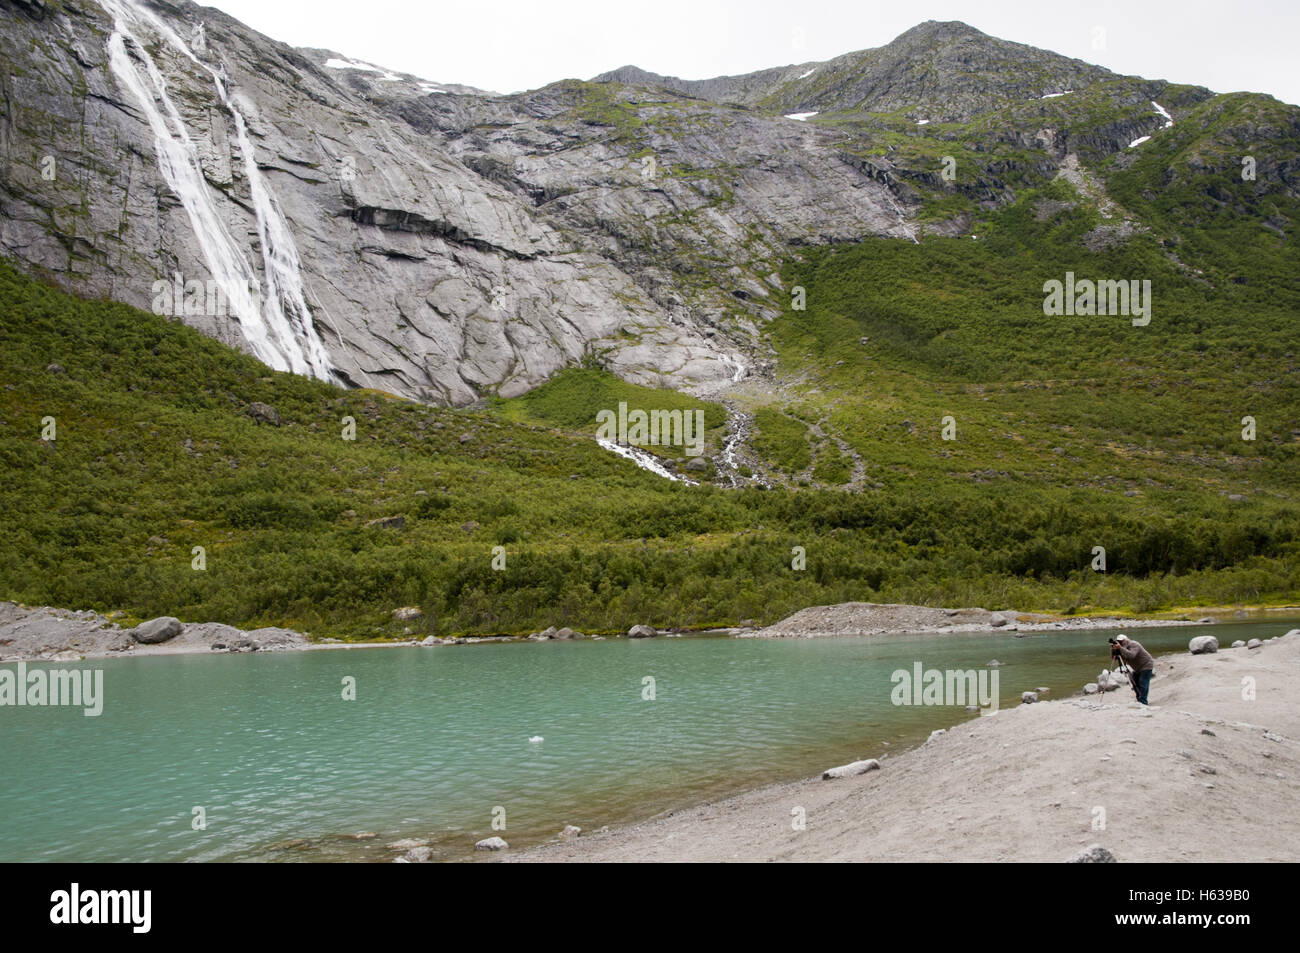 Man taking photos of Briksdal glacier with Tjøtafossen waterfall and the meltwater lagoon, Briksdalen valley, Jostedalsbreen national park, Norway. Stock Photo